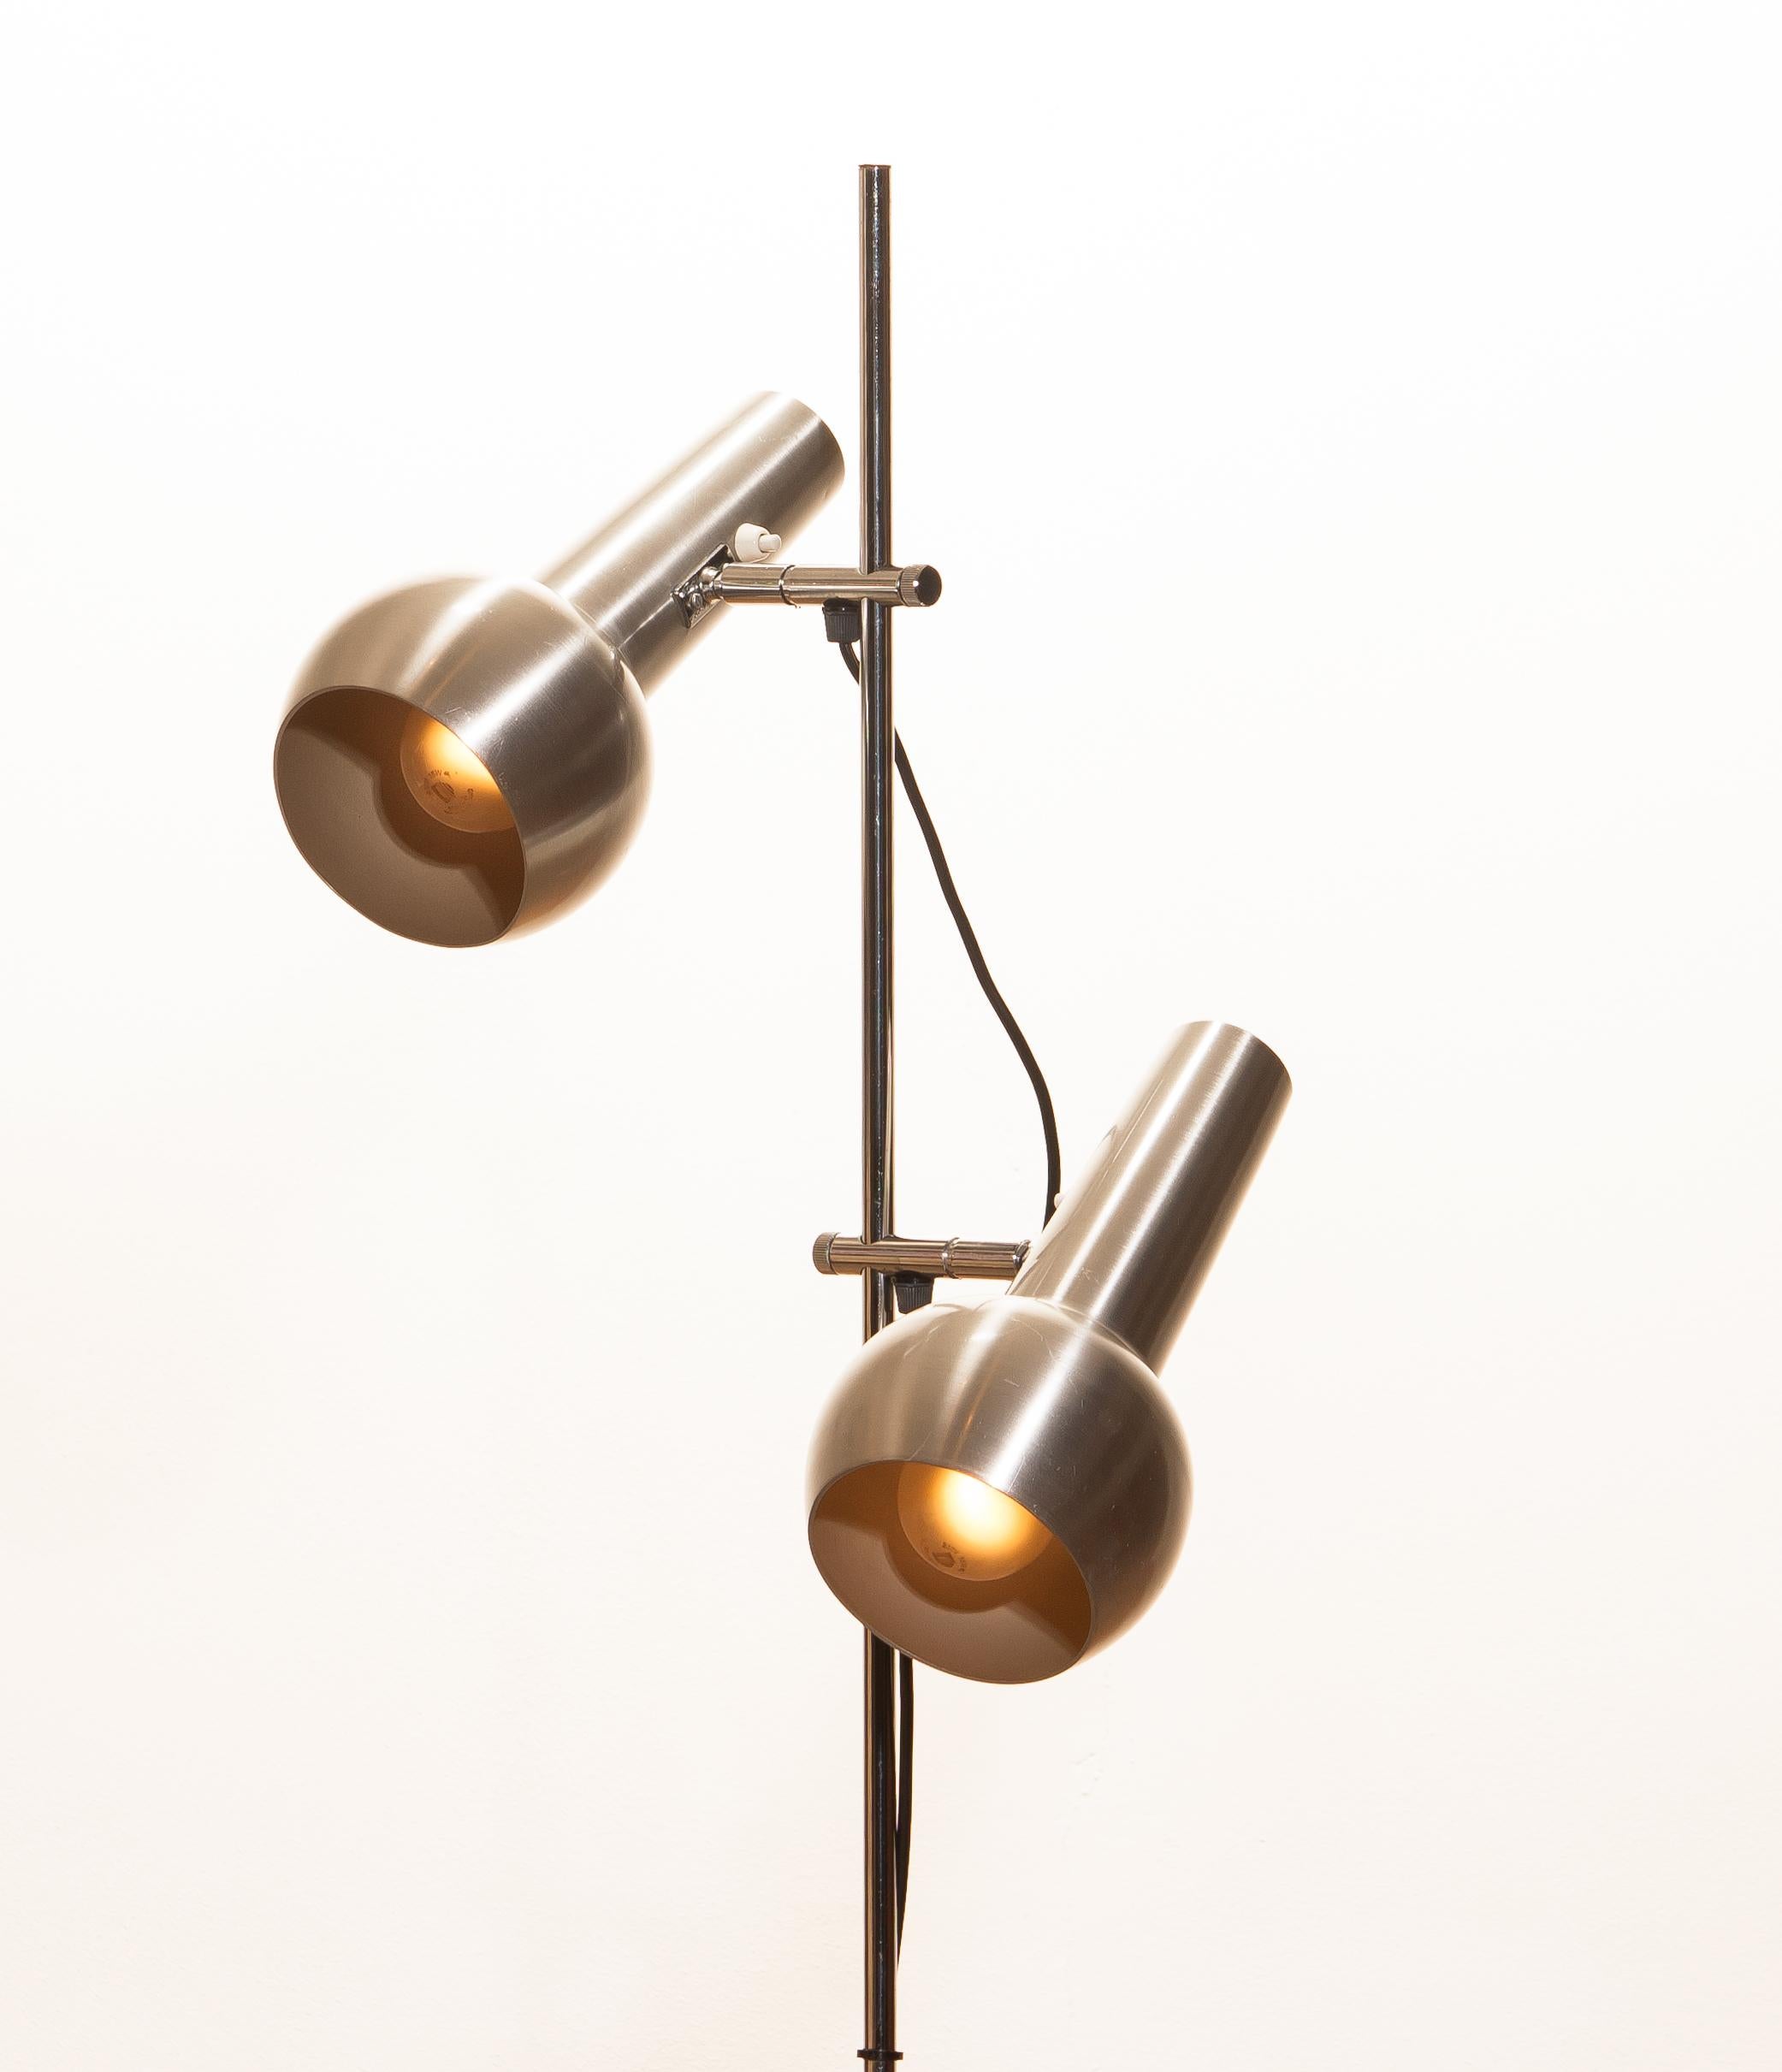 Late 20th Century 1970s, Chrome and Aluminum Double Shade Floor Lamp by Koch & Lowy